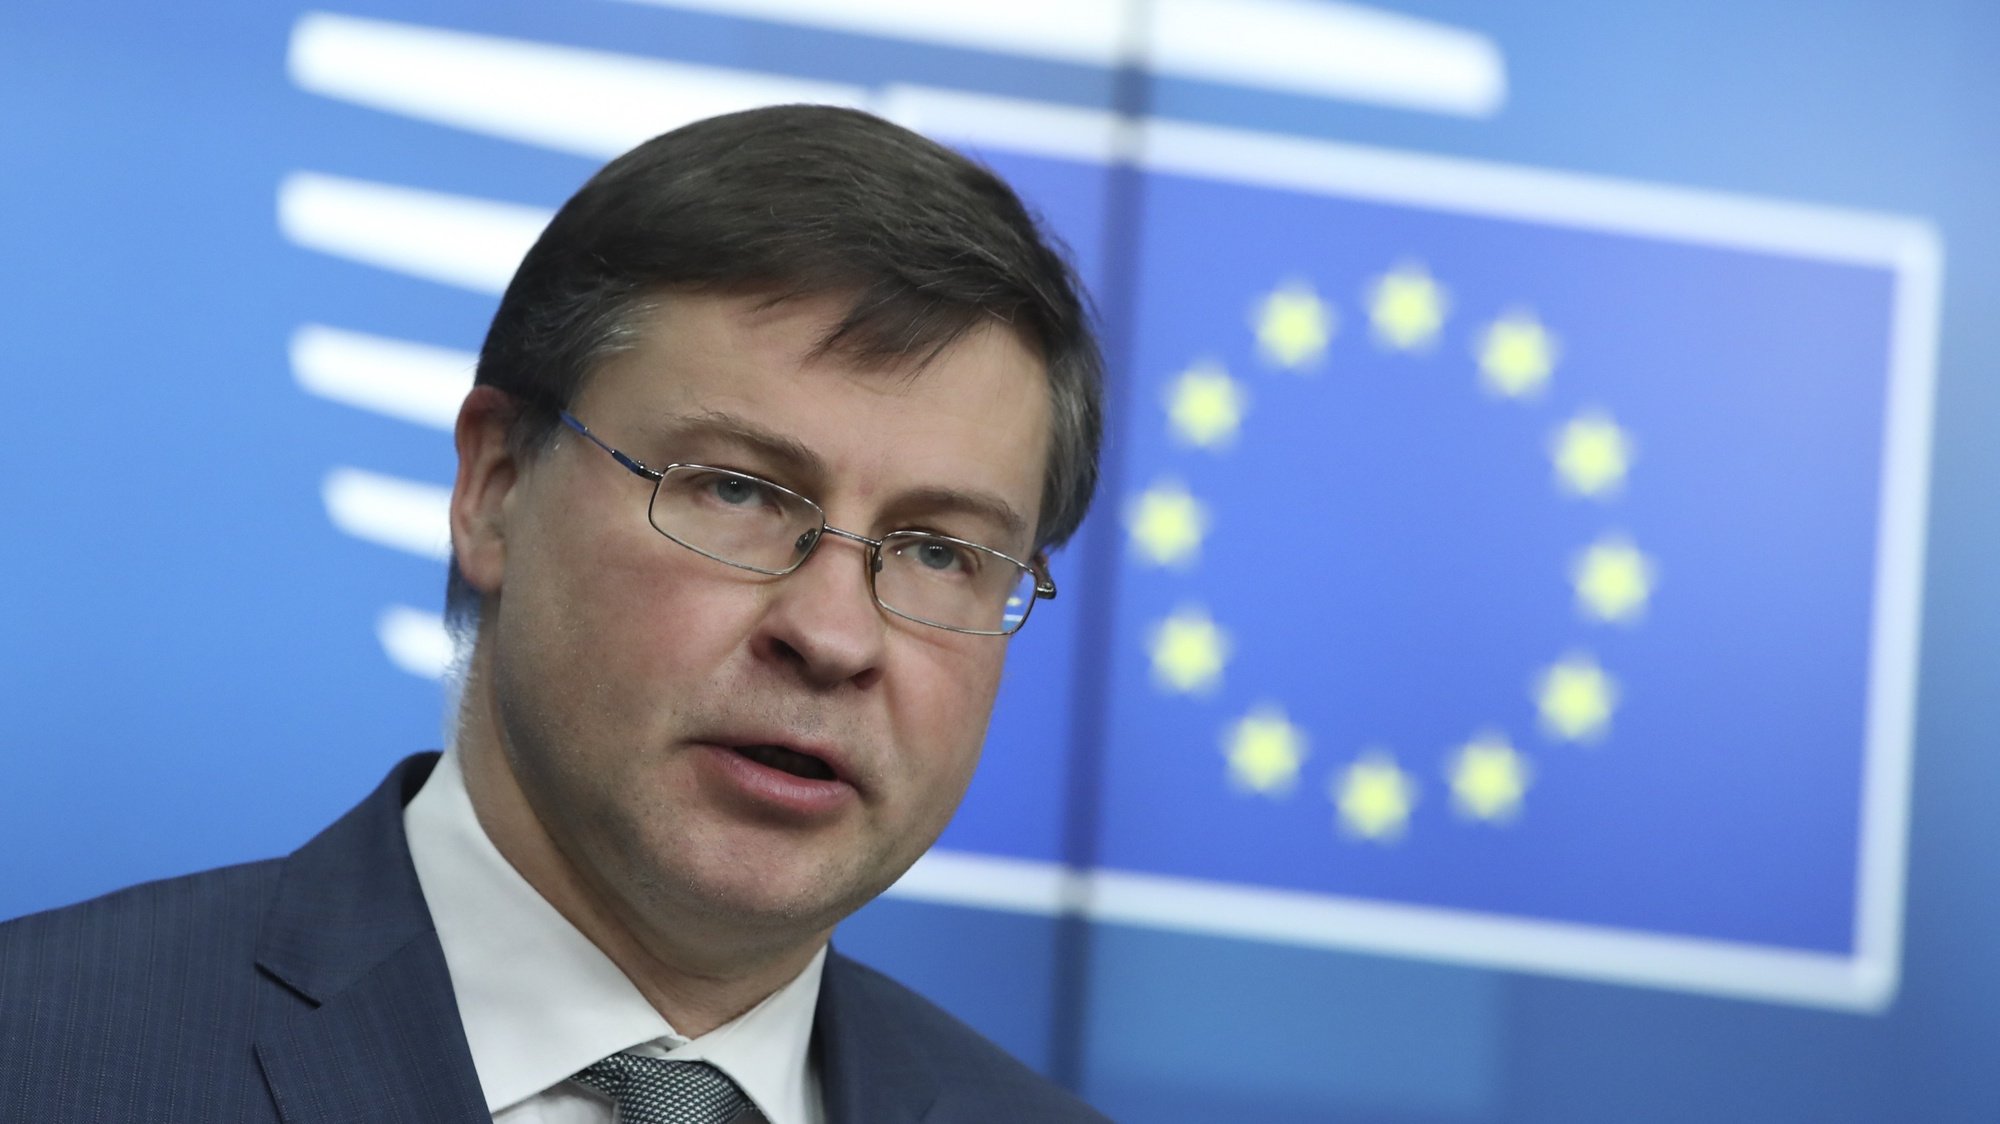 epa09077911 European Commission Vice-President Valdis Dombrovskis speaks during a news conference following a European Union finance ministers meeting in Brussels, Belgium, 16 March 2021.  EPA/YVES HERMAN / POOL